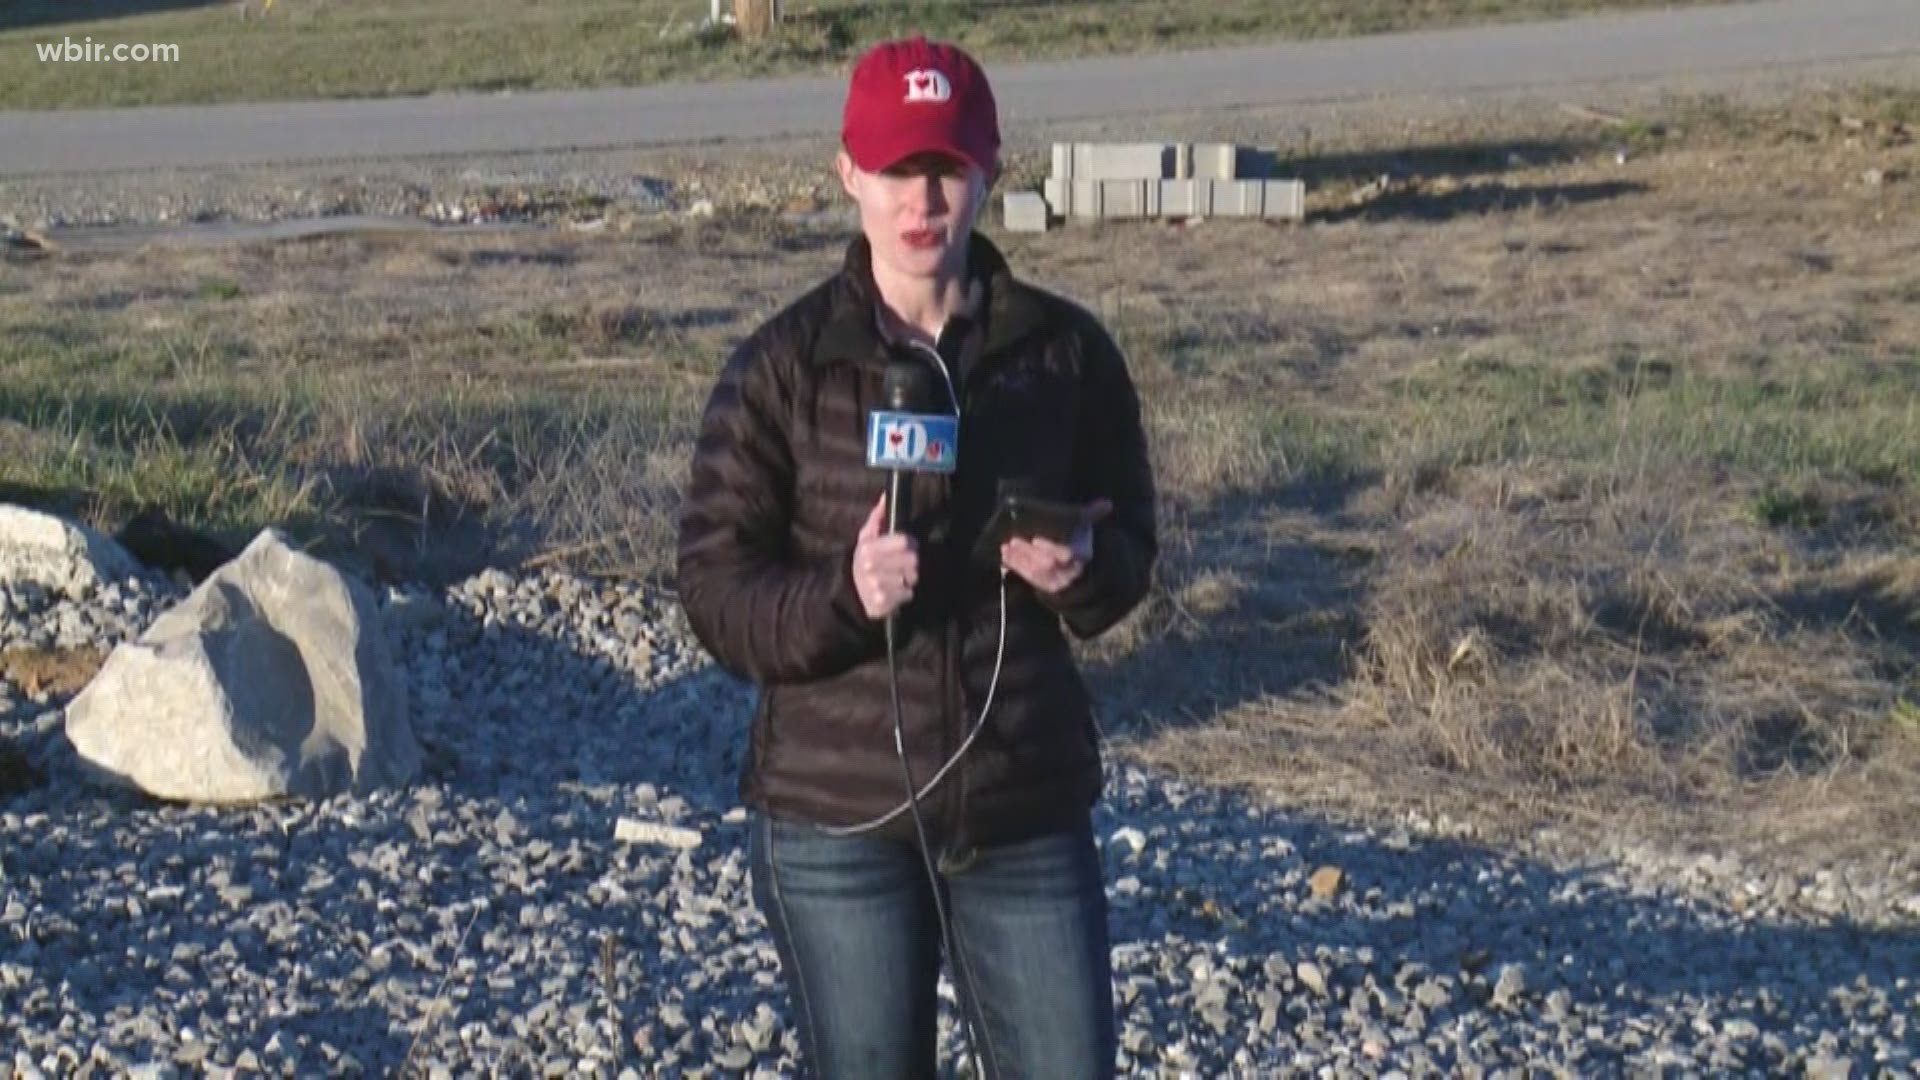 Meteorologist Cassie Nall covered the storm one year ago when deadly tornadoes touched down in Middle Tennessee.